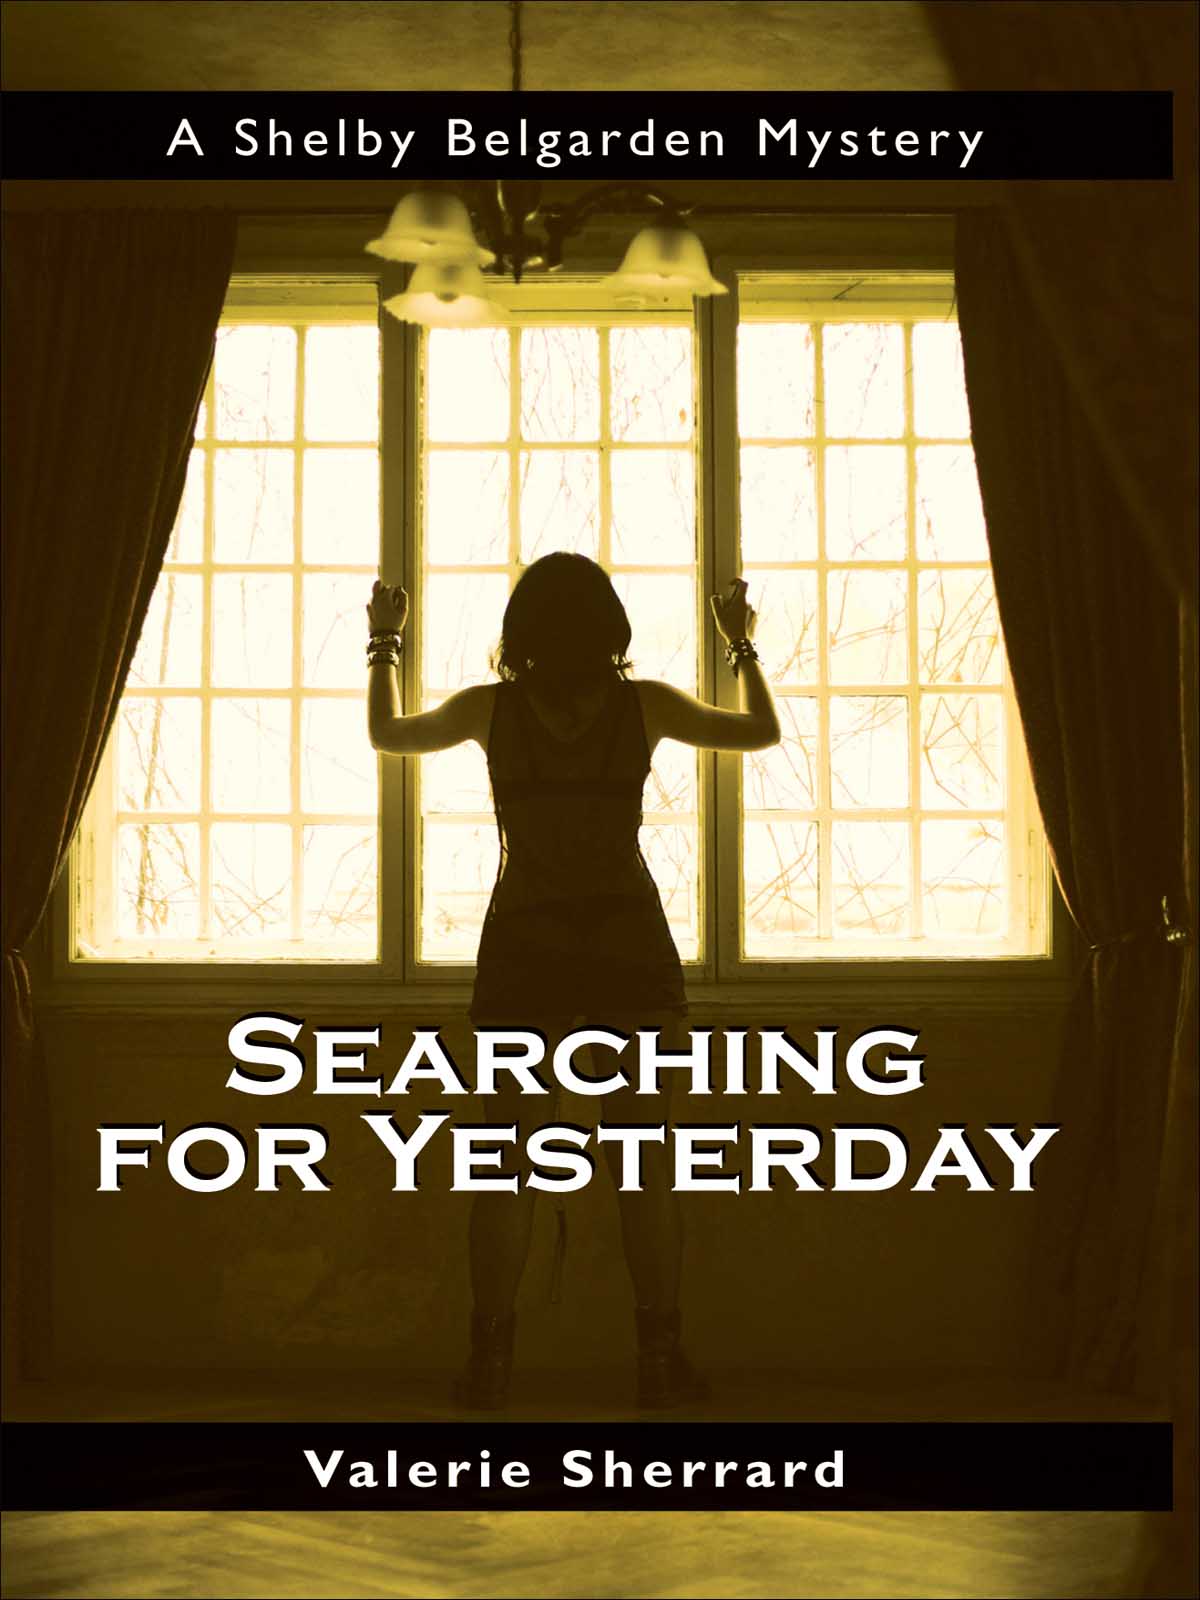 Searching for Yesterday (2008) by Valerie Sherrard